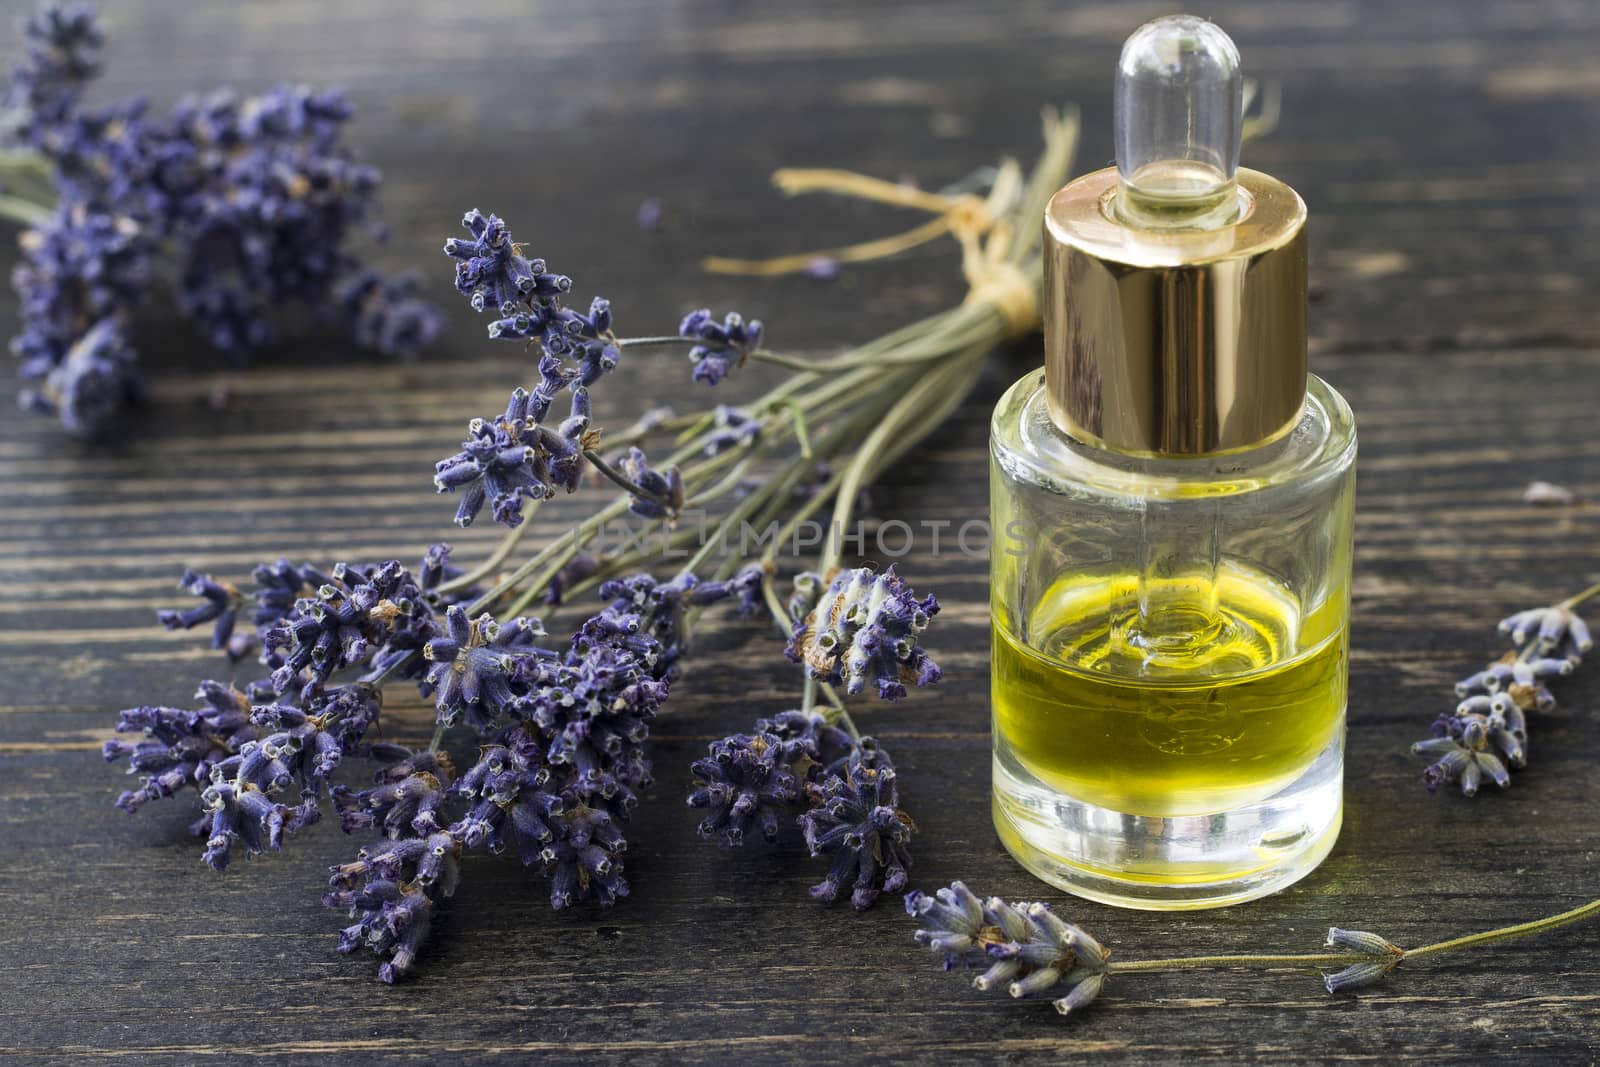 Herbal oil and lavender flowers on wooden background.Selective focus